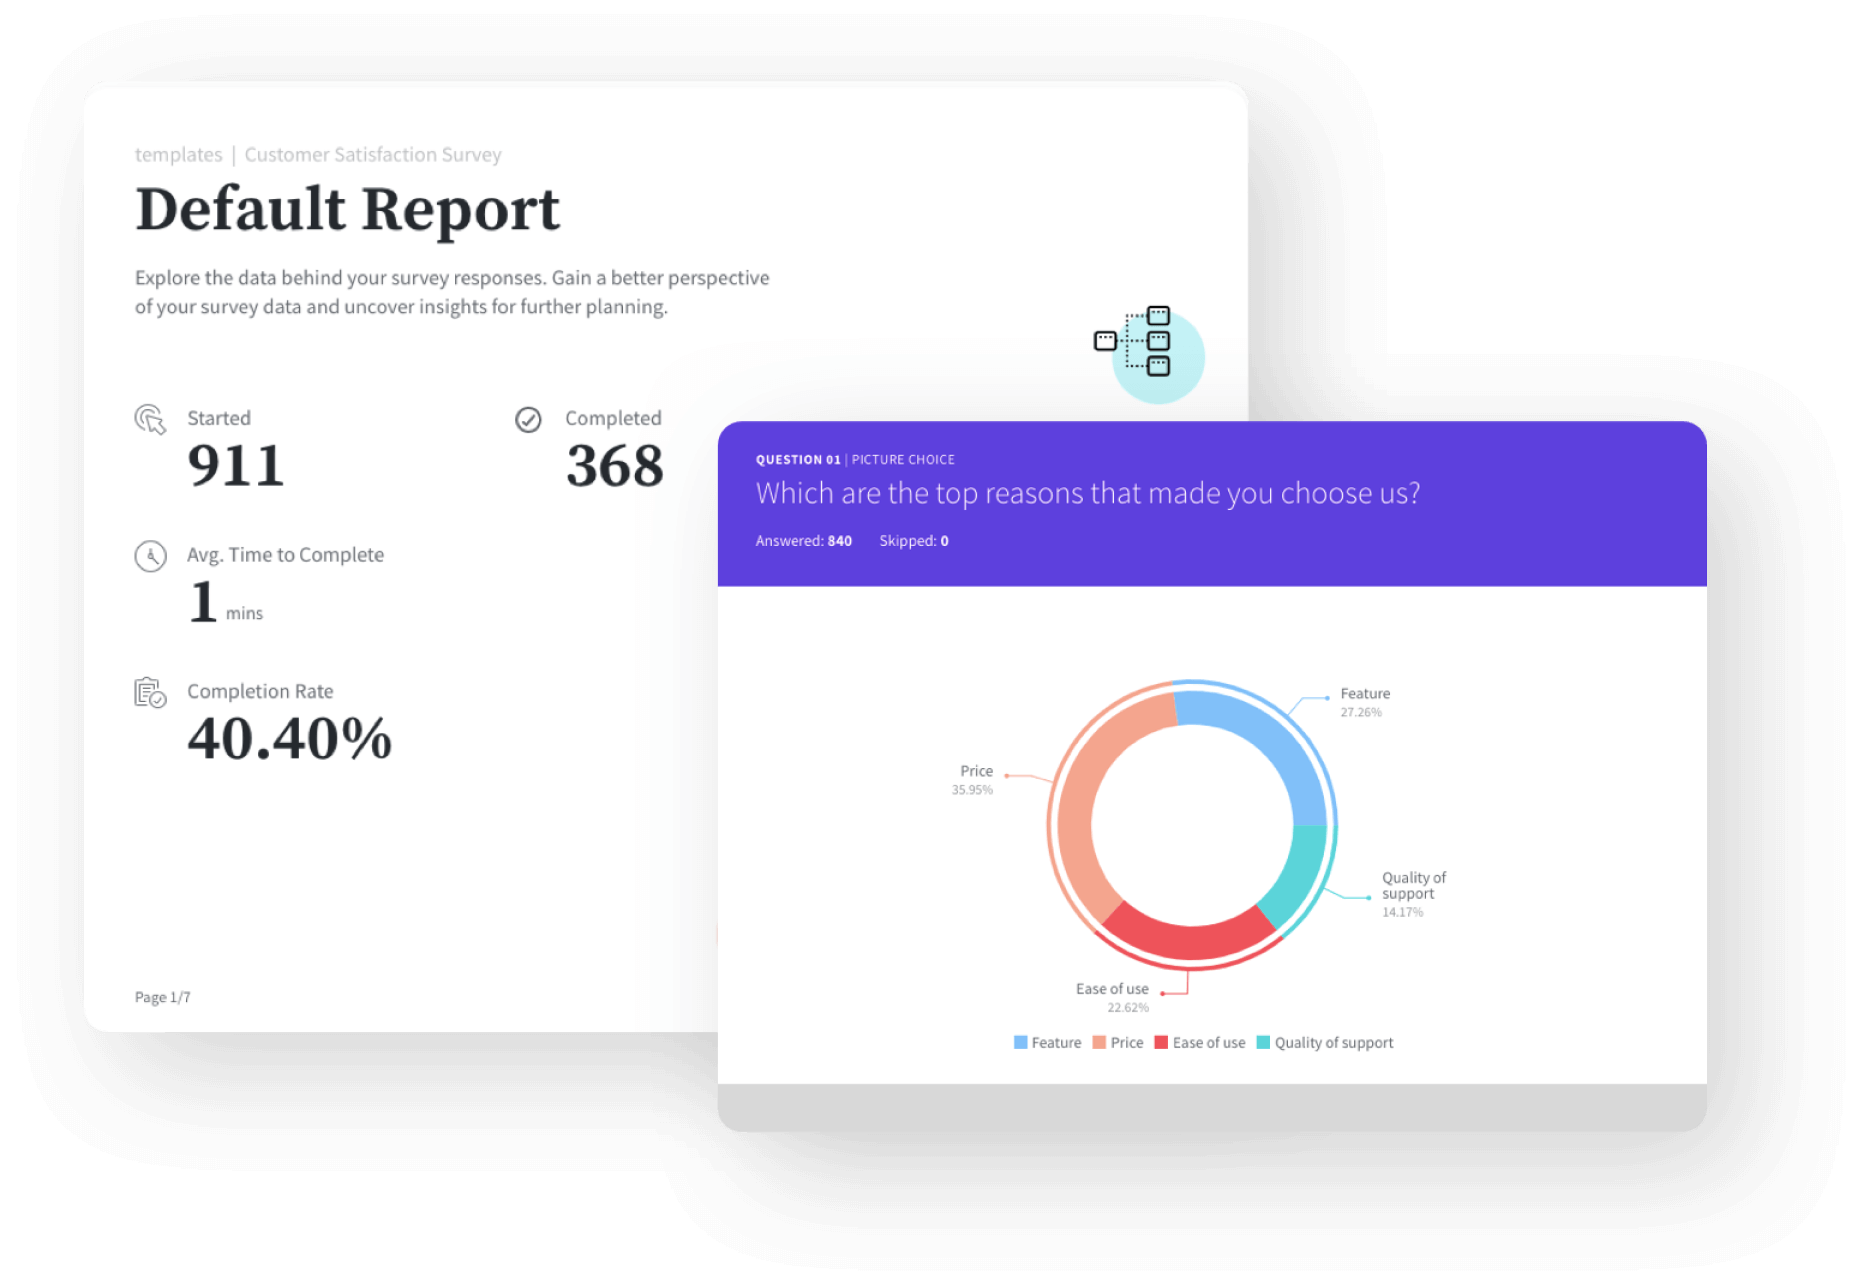 Perform in-depth analysis using detailed reports and advanced filters.